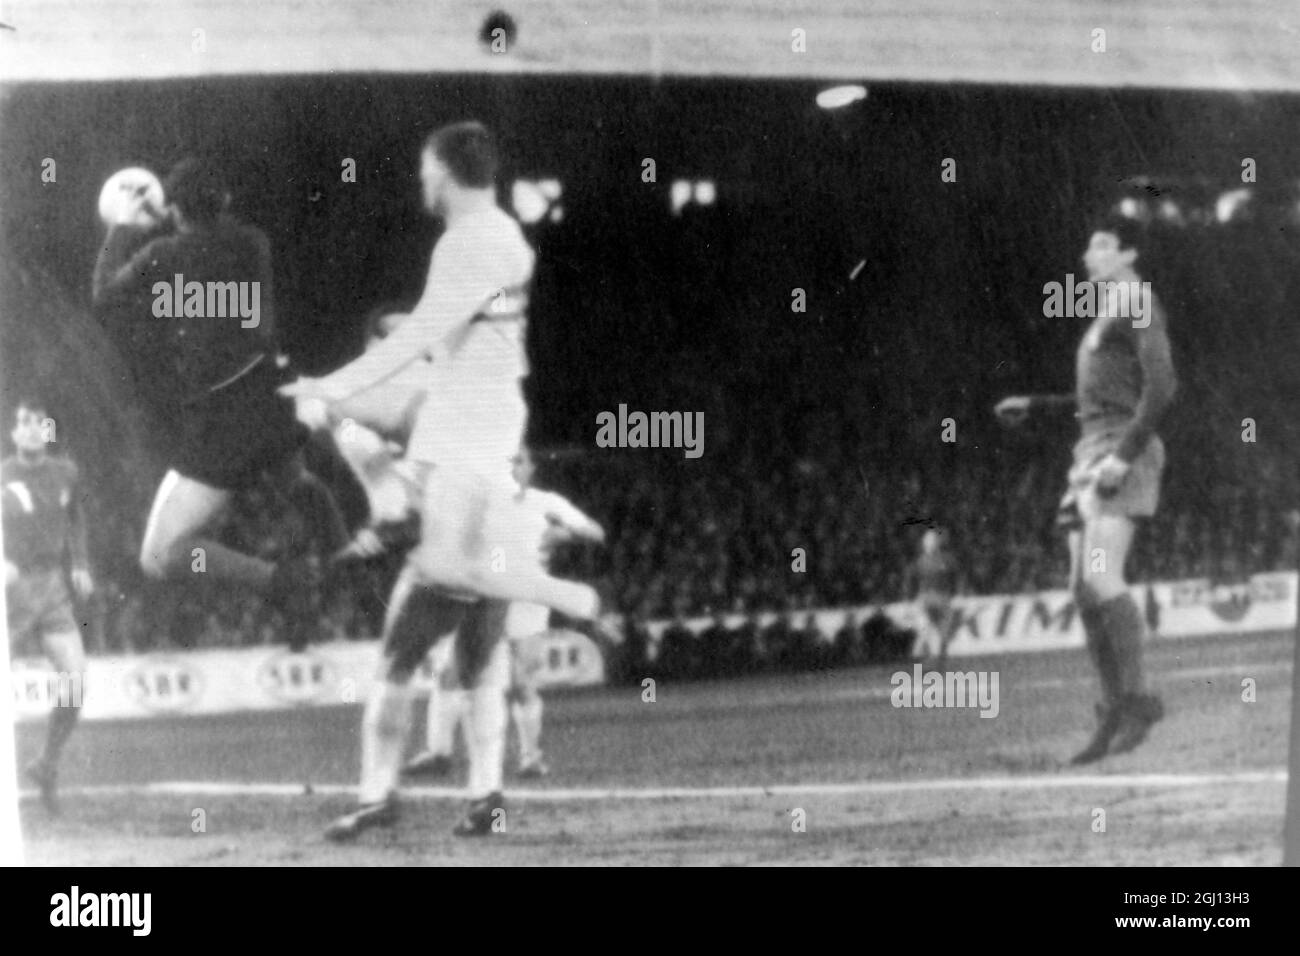 ARAQUISTAIN - GOALKEEPR OF READ MADRID FOOTBALL CLUB IN ACTION - ; 13 APRIL 1962 Stock Photo